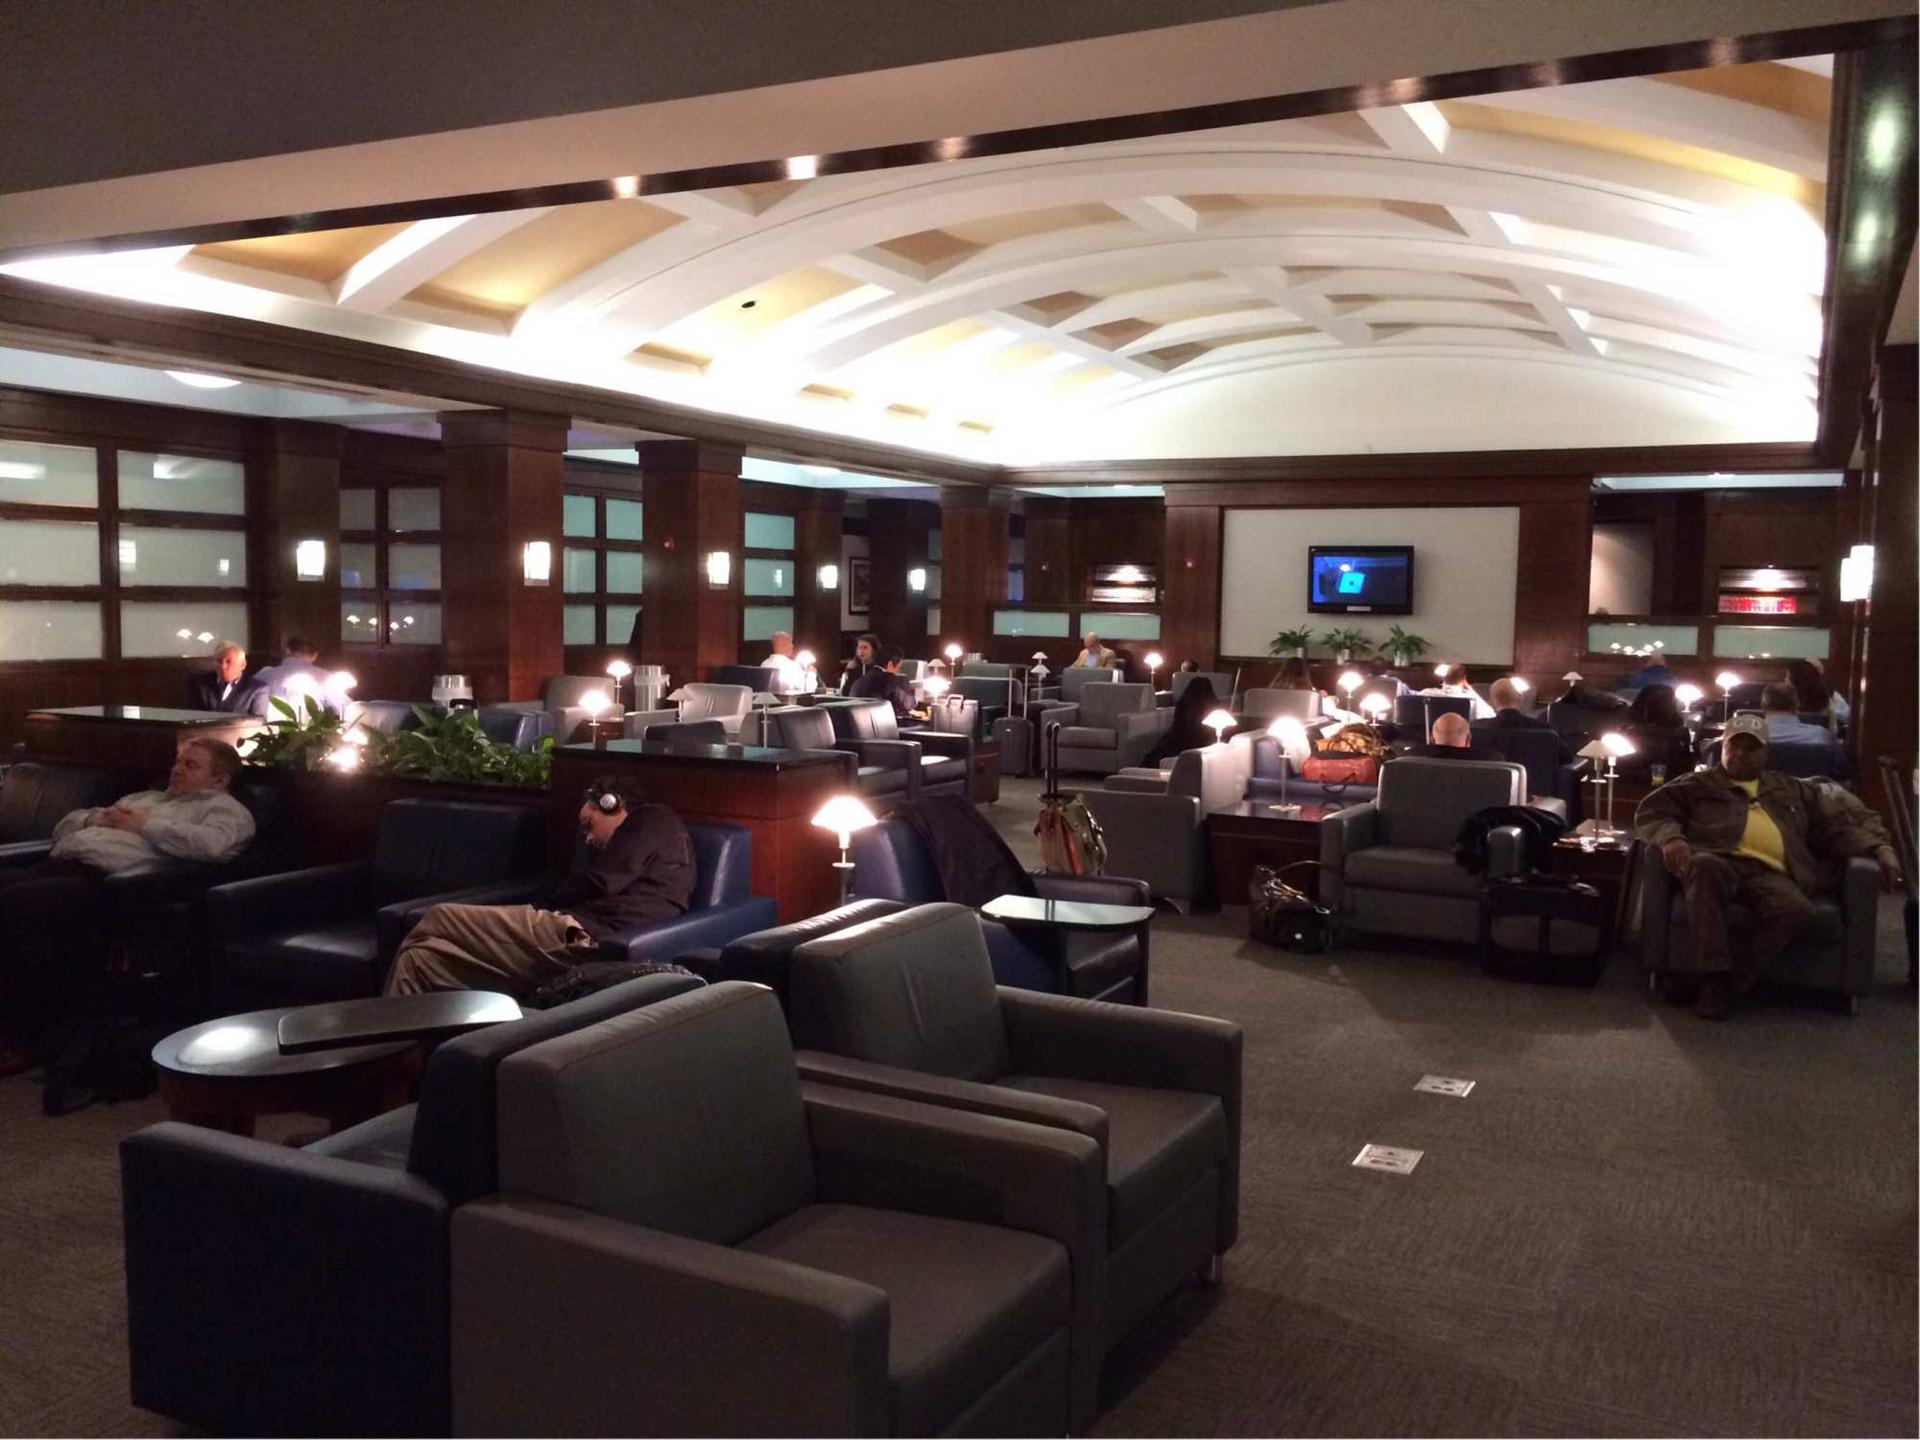 American Airlines Admirals Club image 2 of 37